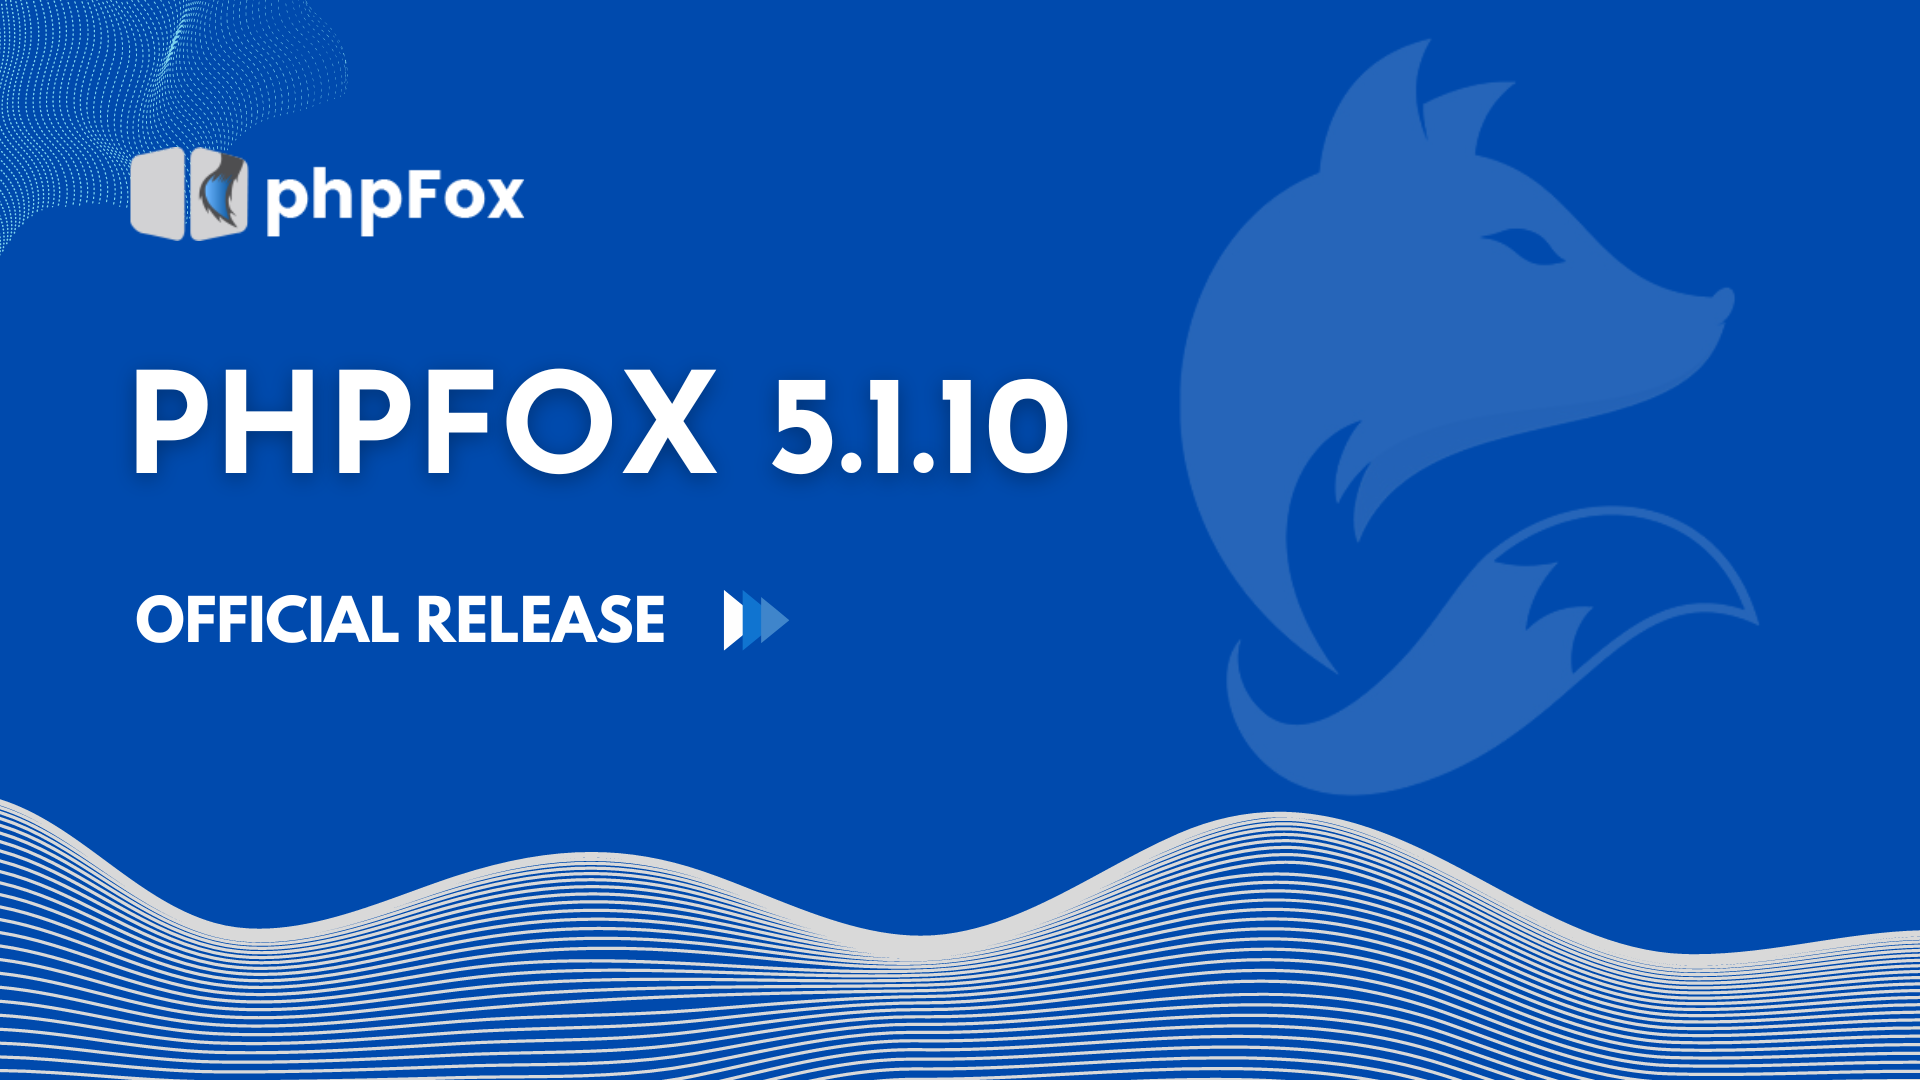 the image describe phpFox release 5.1.10